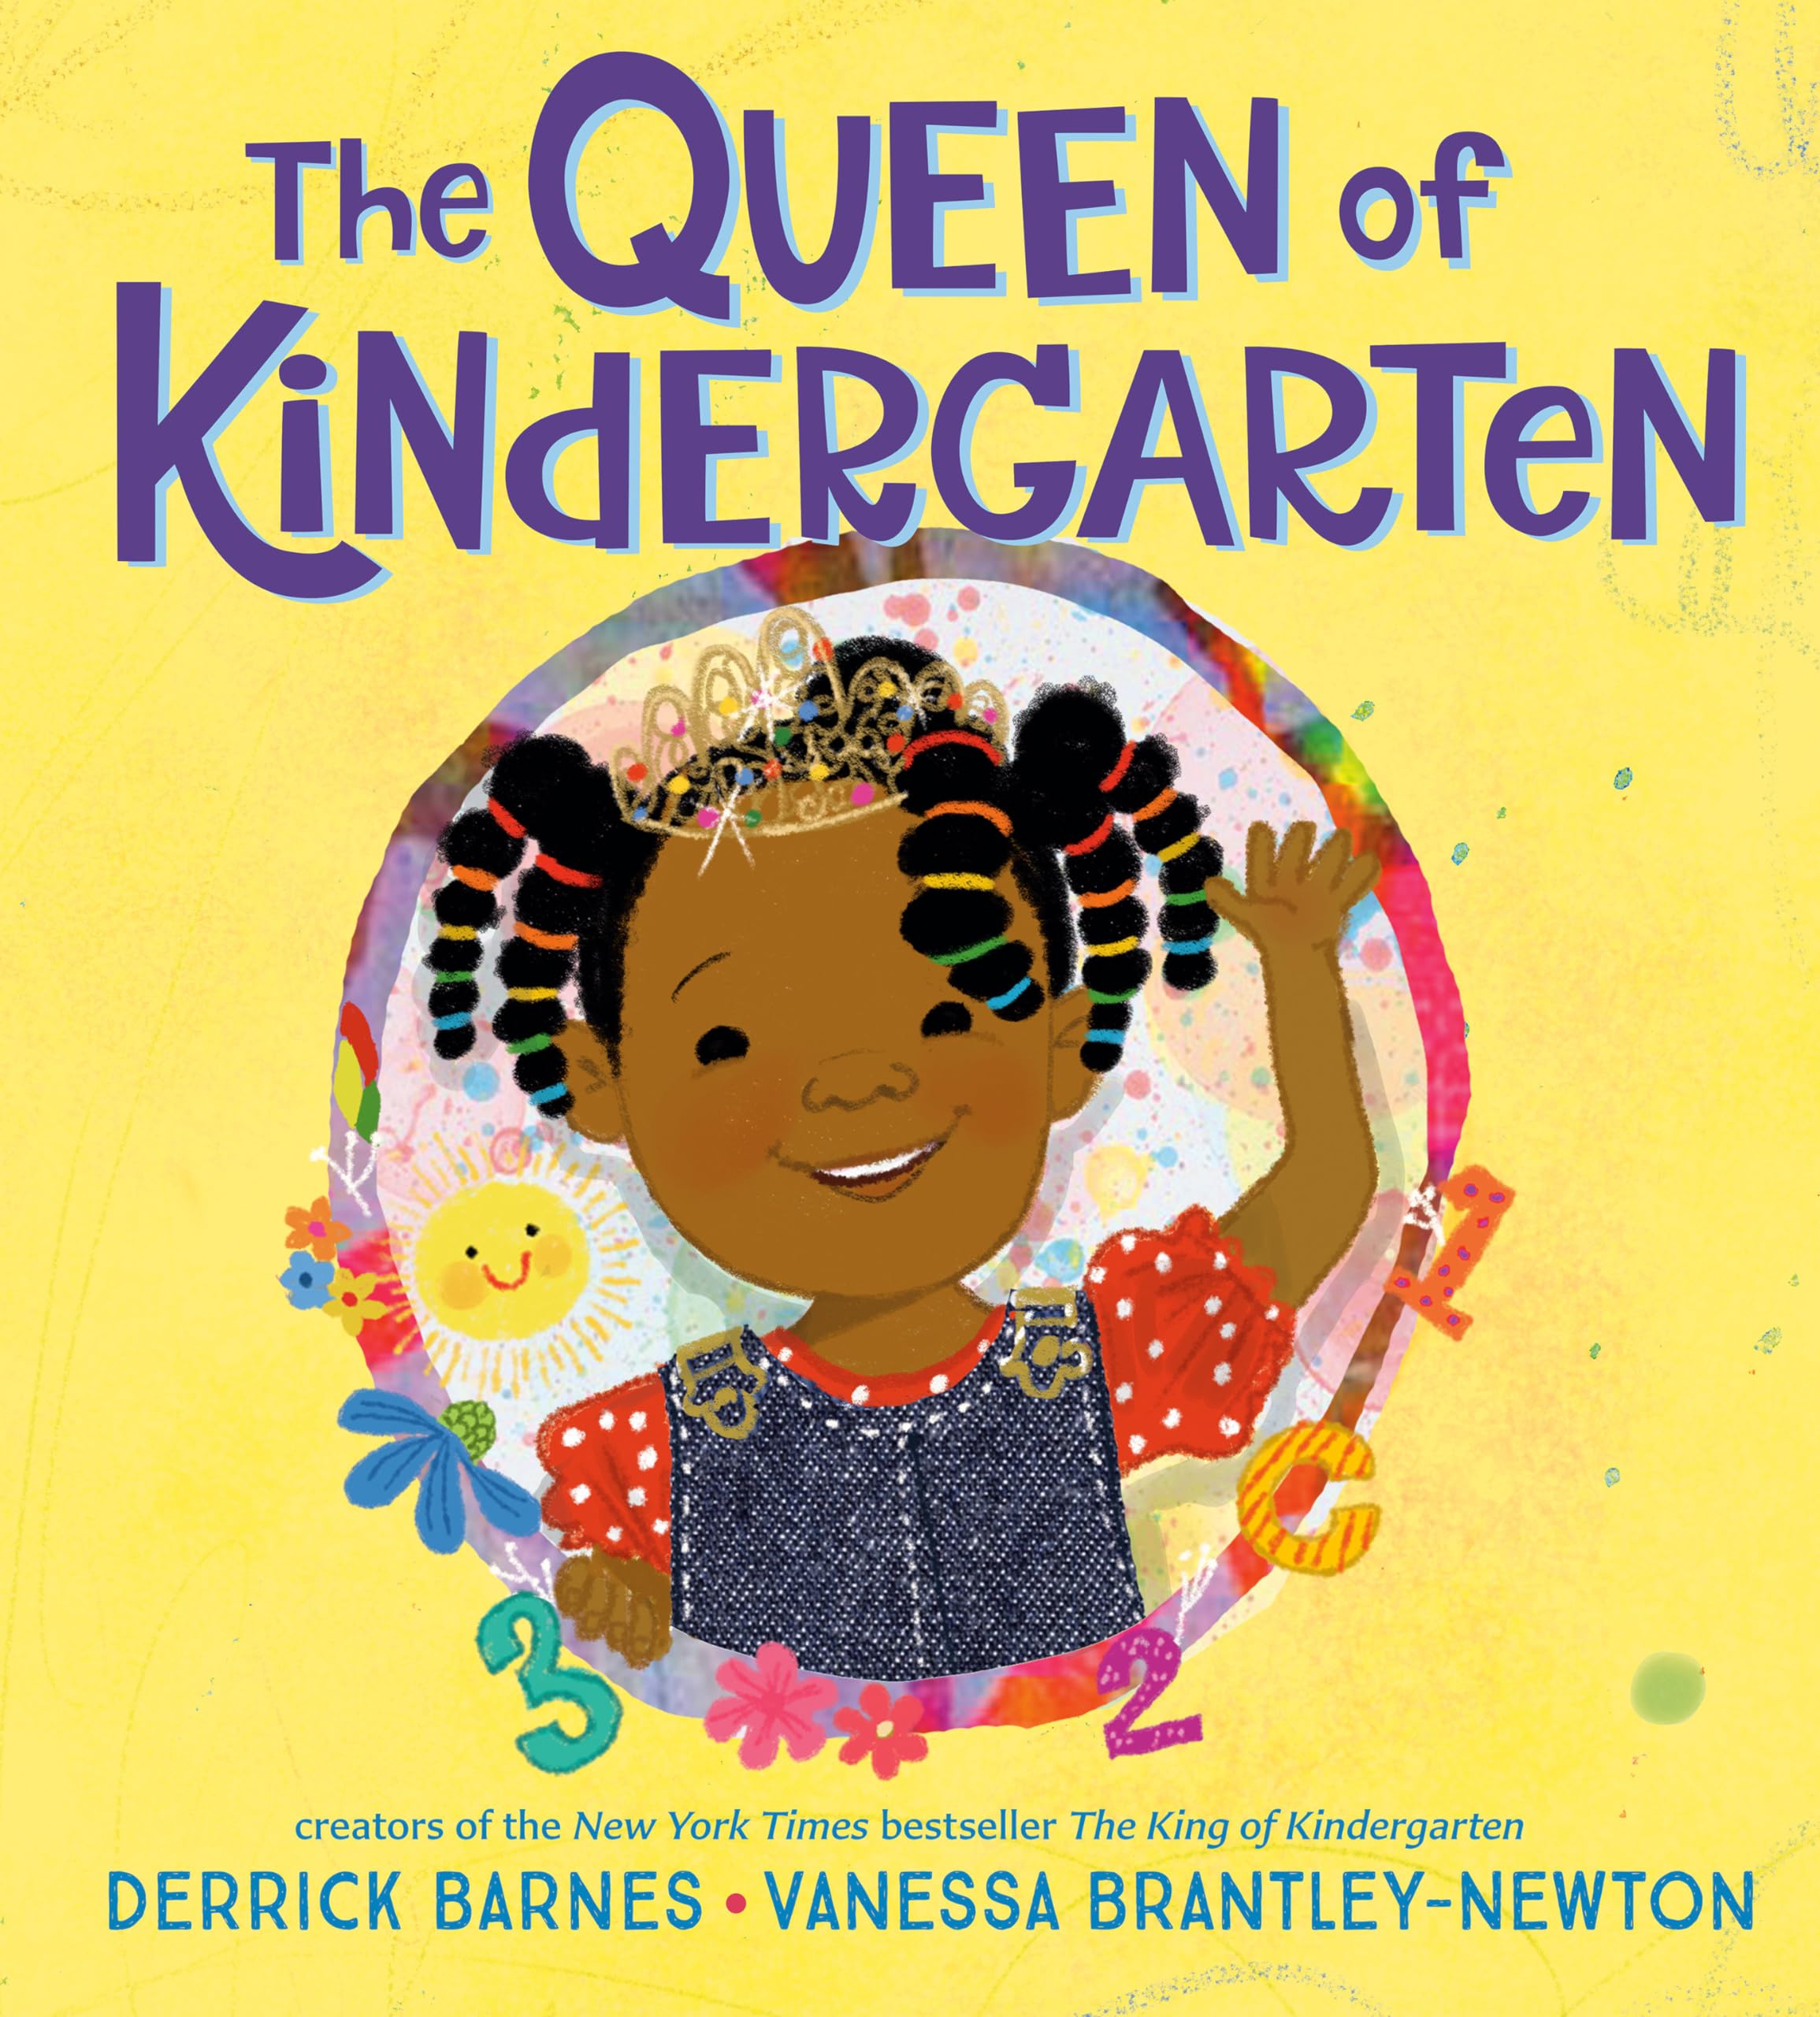 Book Cover with title and author and illustration of a Black girl ready for school